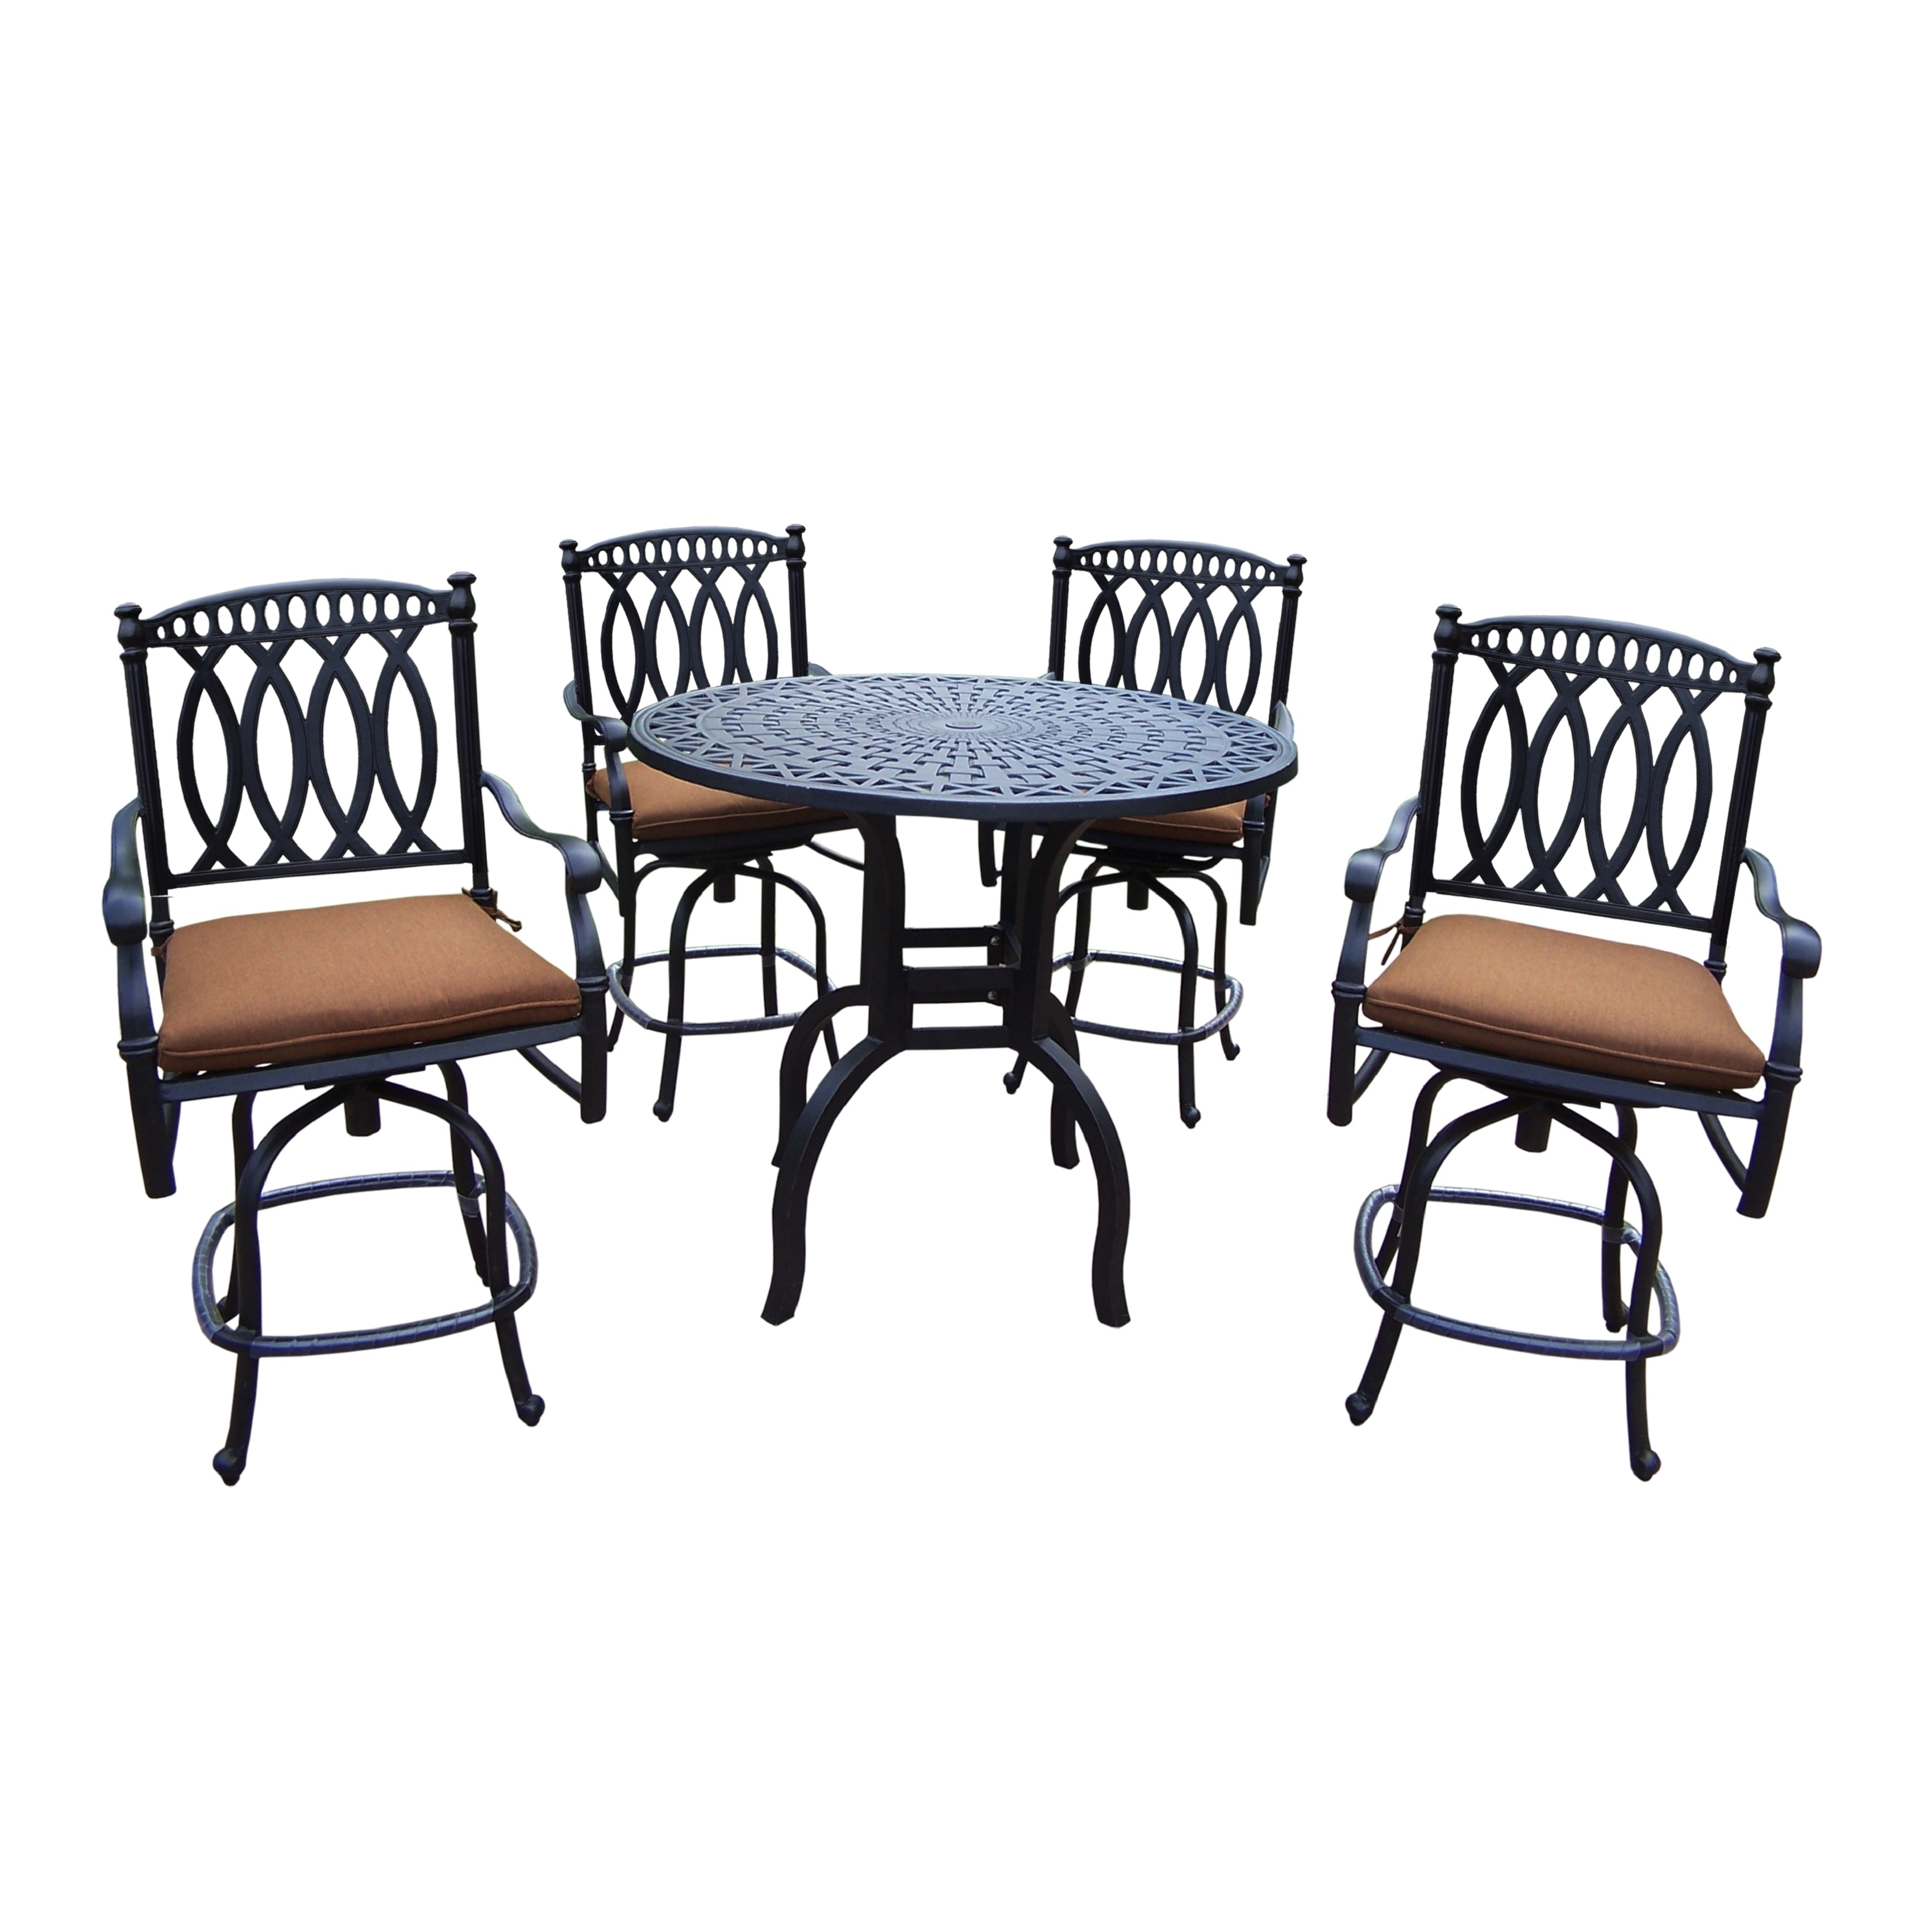 Milan Aluminum 5 Piece Bar Set With 42-inch Round Bar Table And 4 Sunbrella Cushioned Swivel Stools